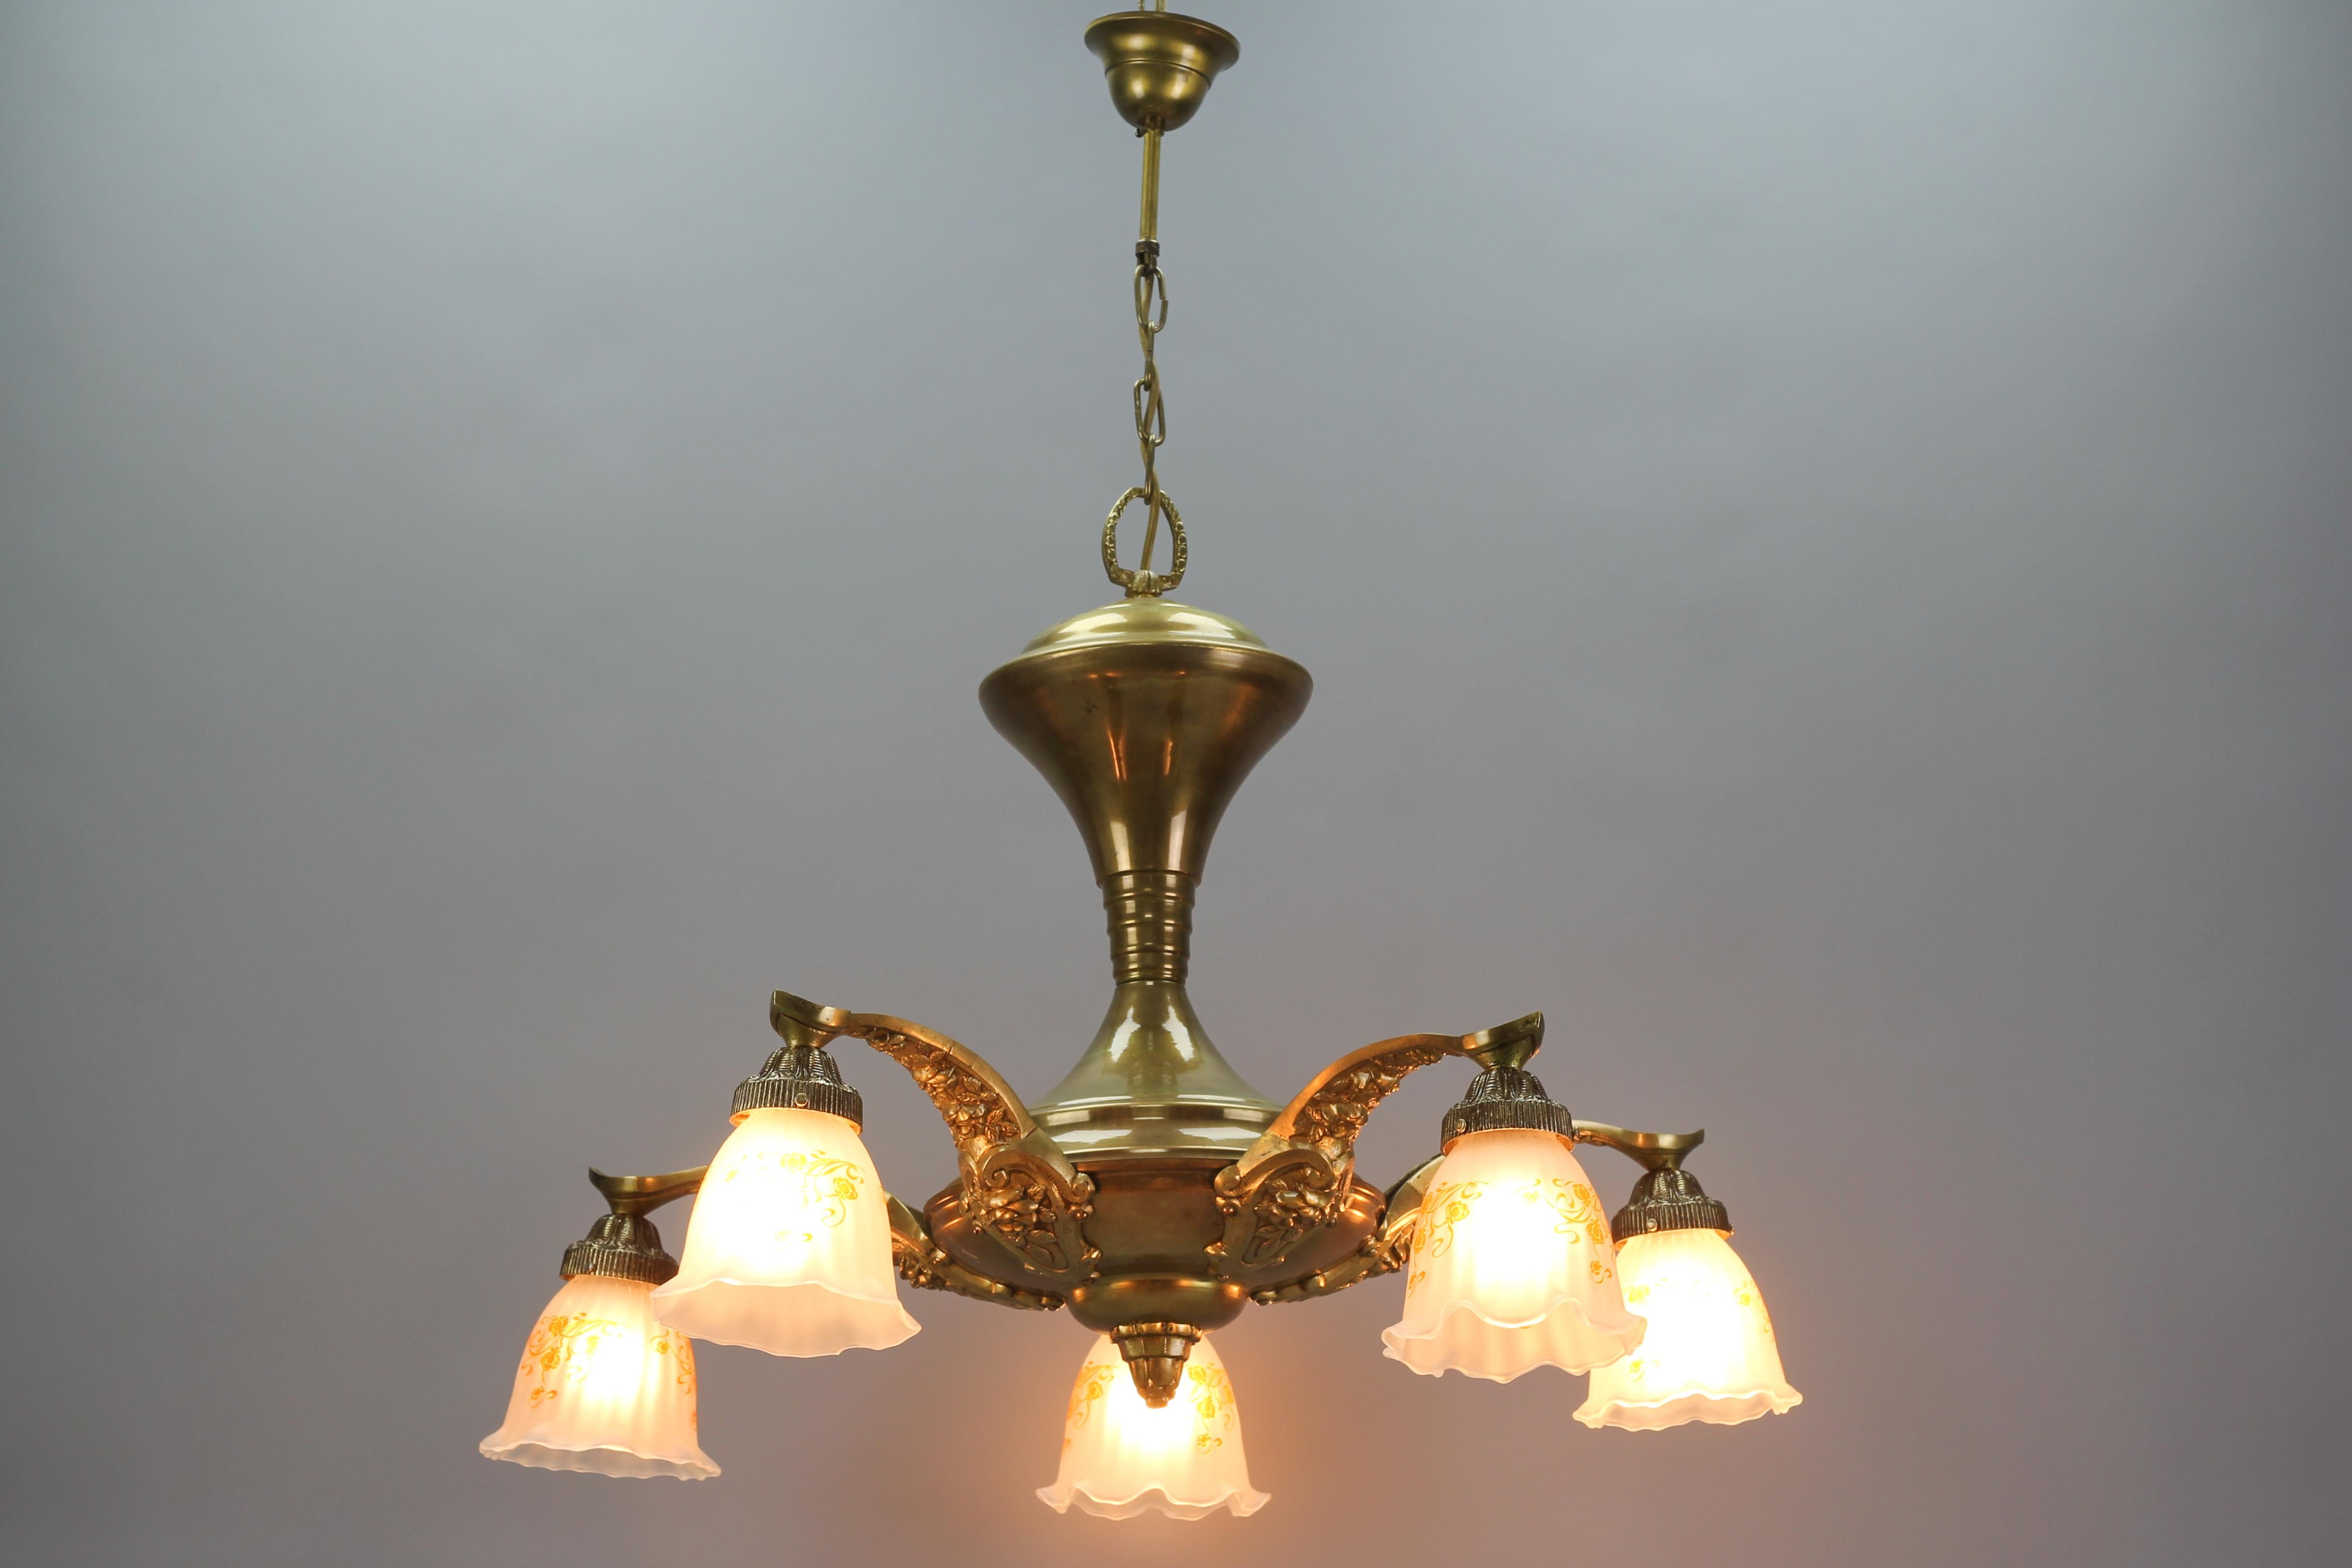 This beautiful French Art Nouveau chandelier features a brass central body and five arms, made of bronze and richly decorated with roses and rose leaves. Each arm has a white frosted glass shade with floral decoration in dark orange, and a socket